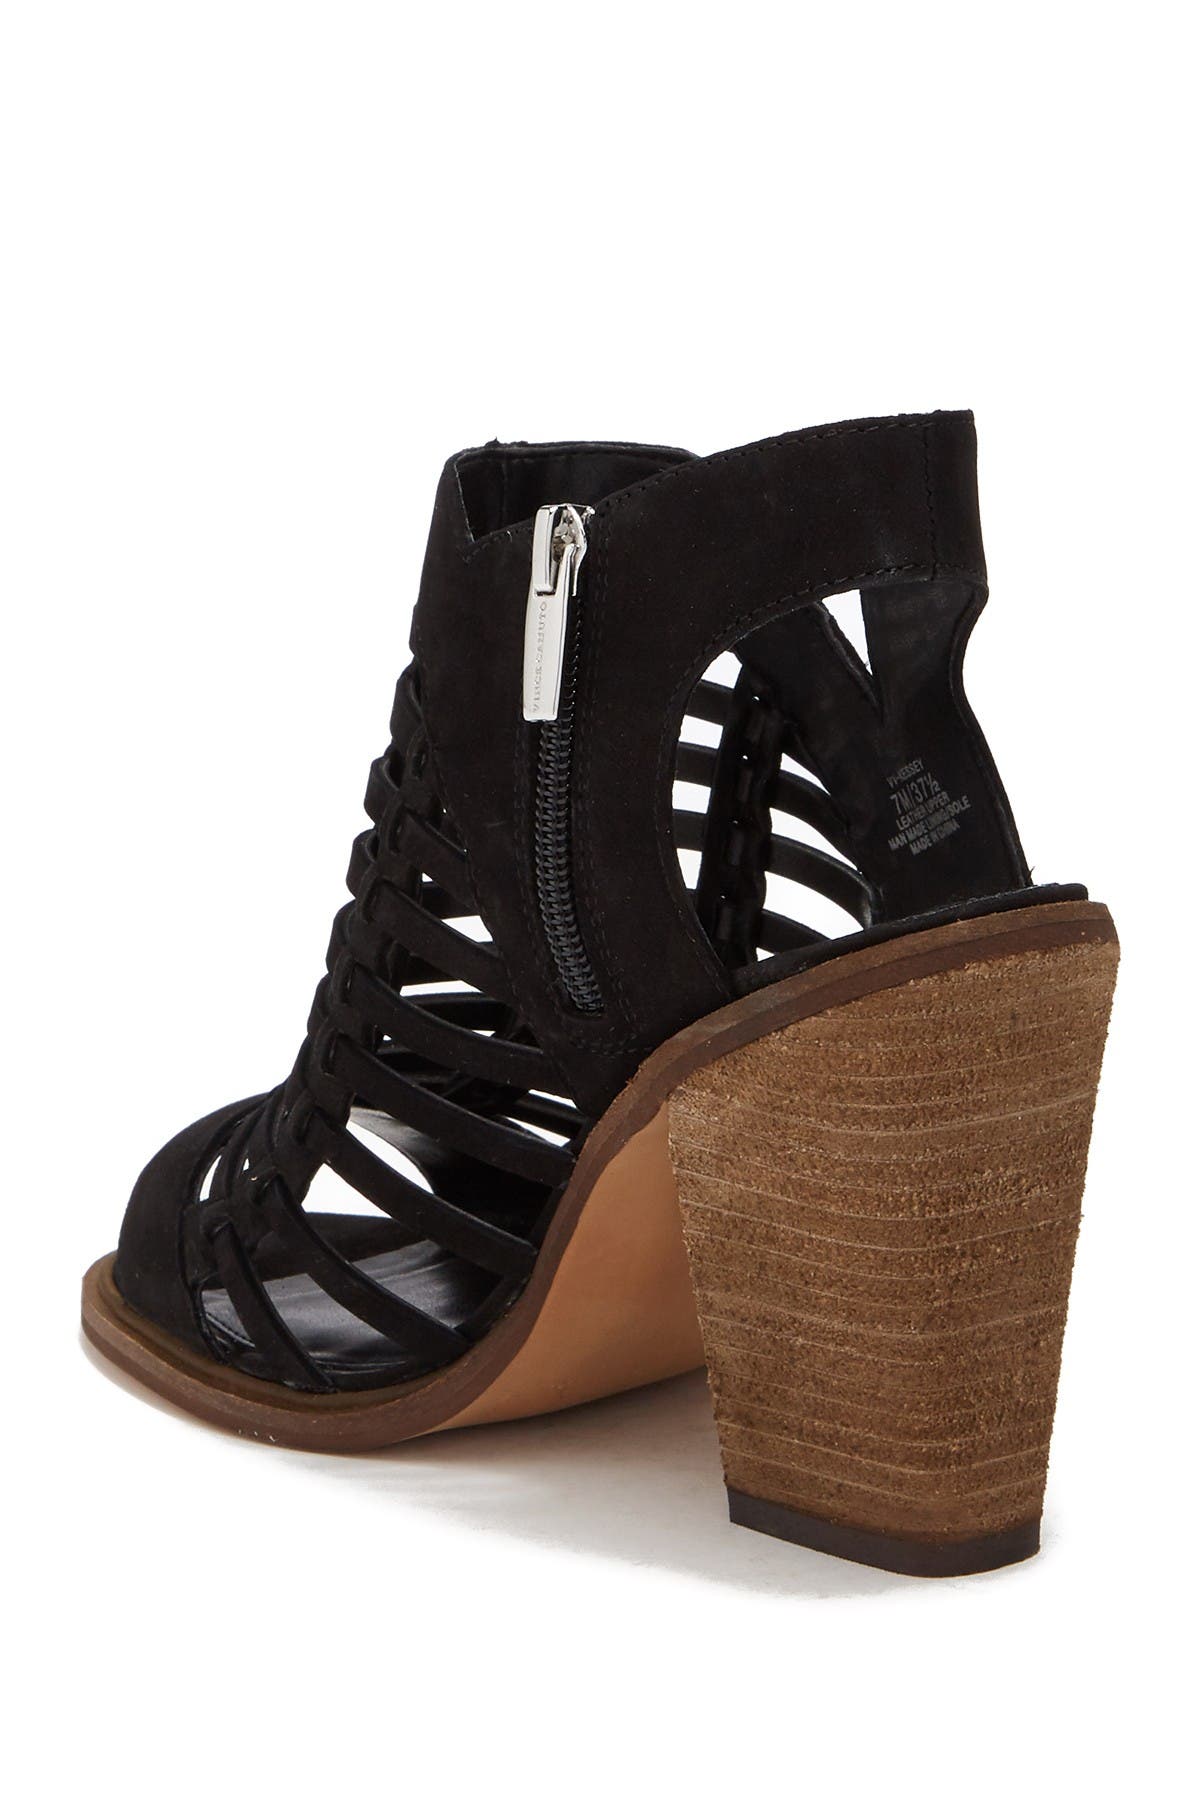 Vince Camuto | Kessey Woven Leather 